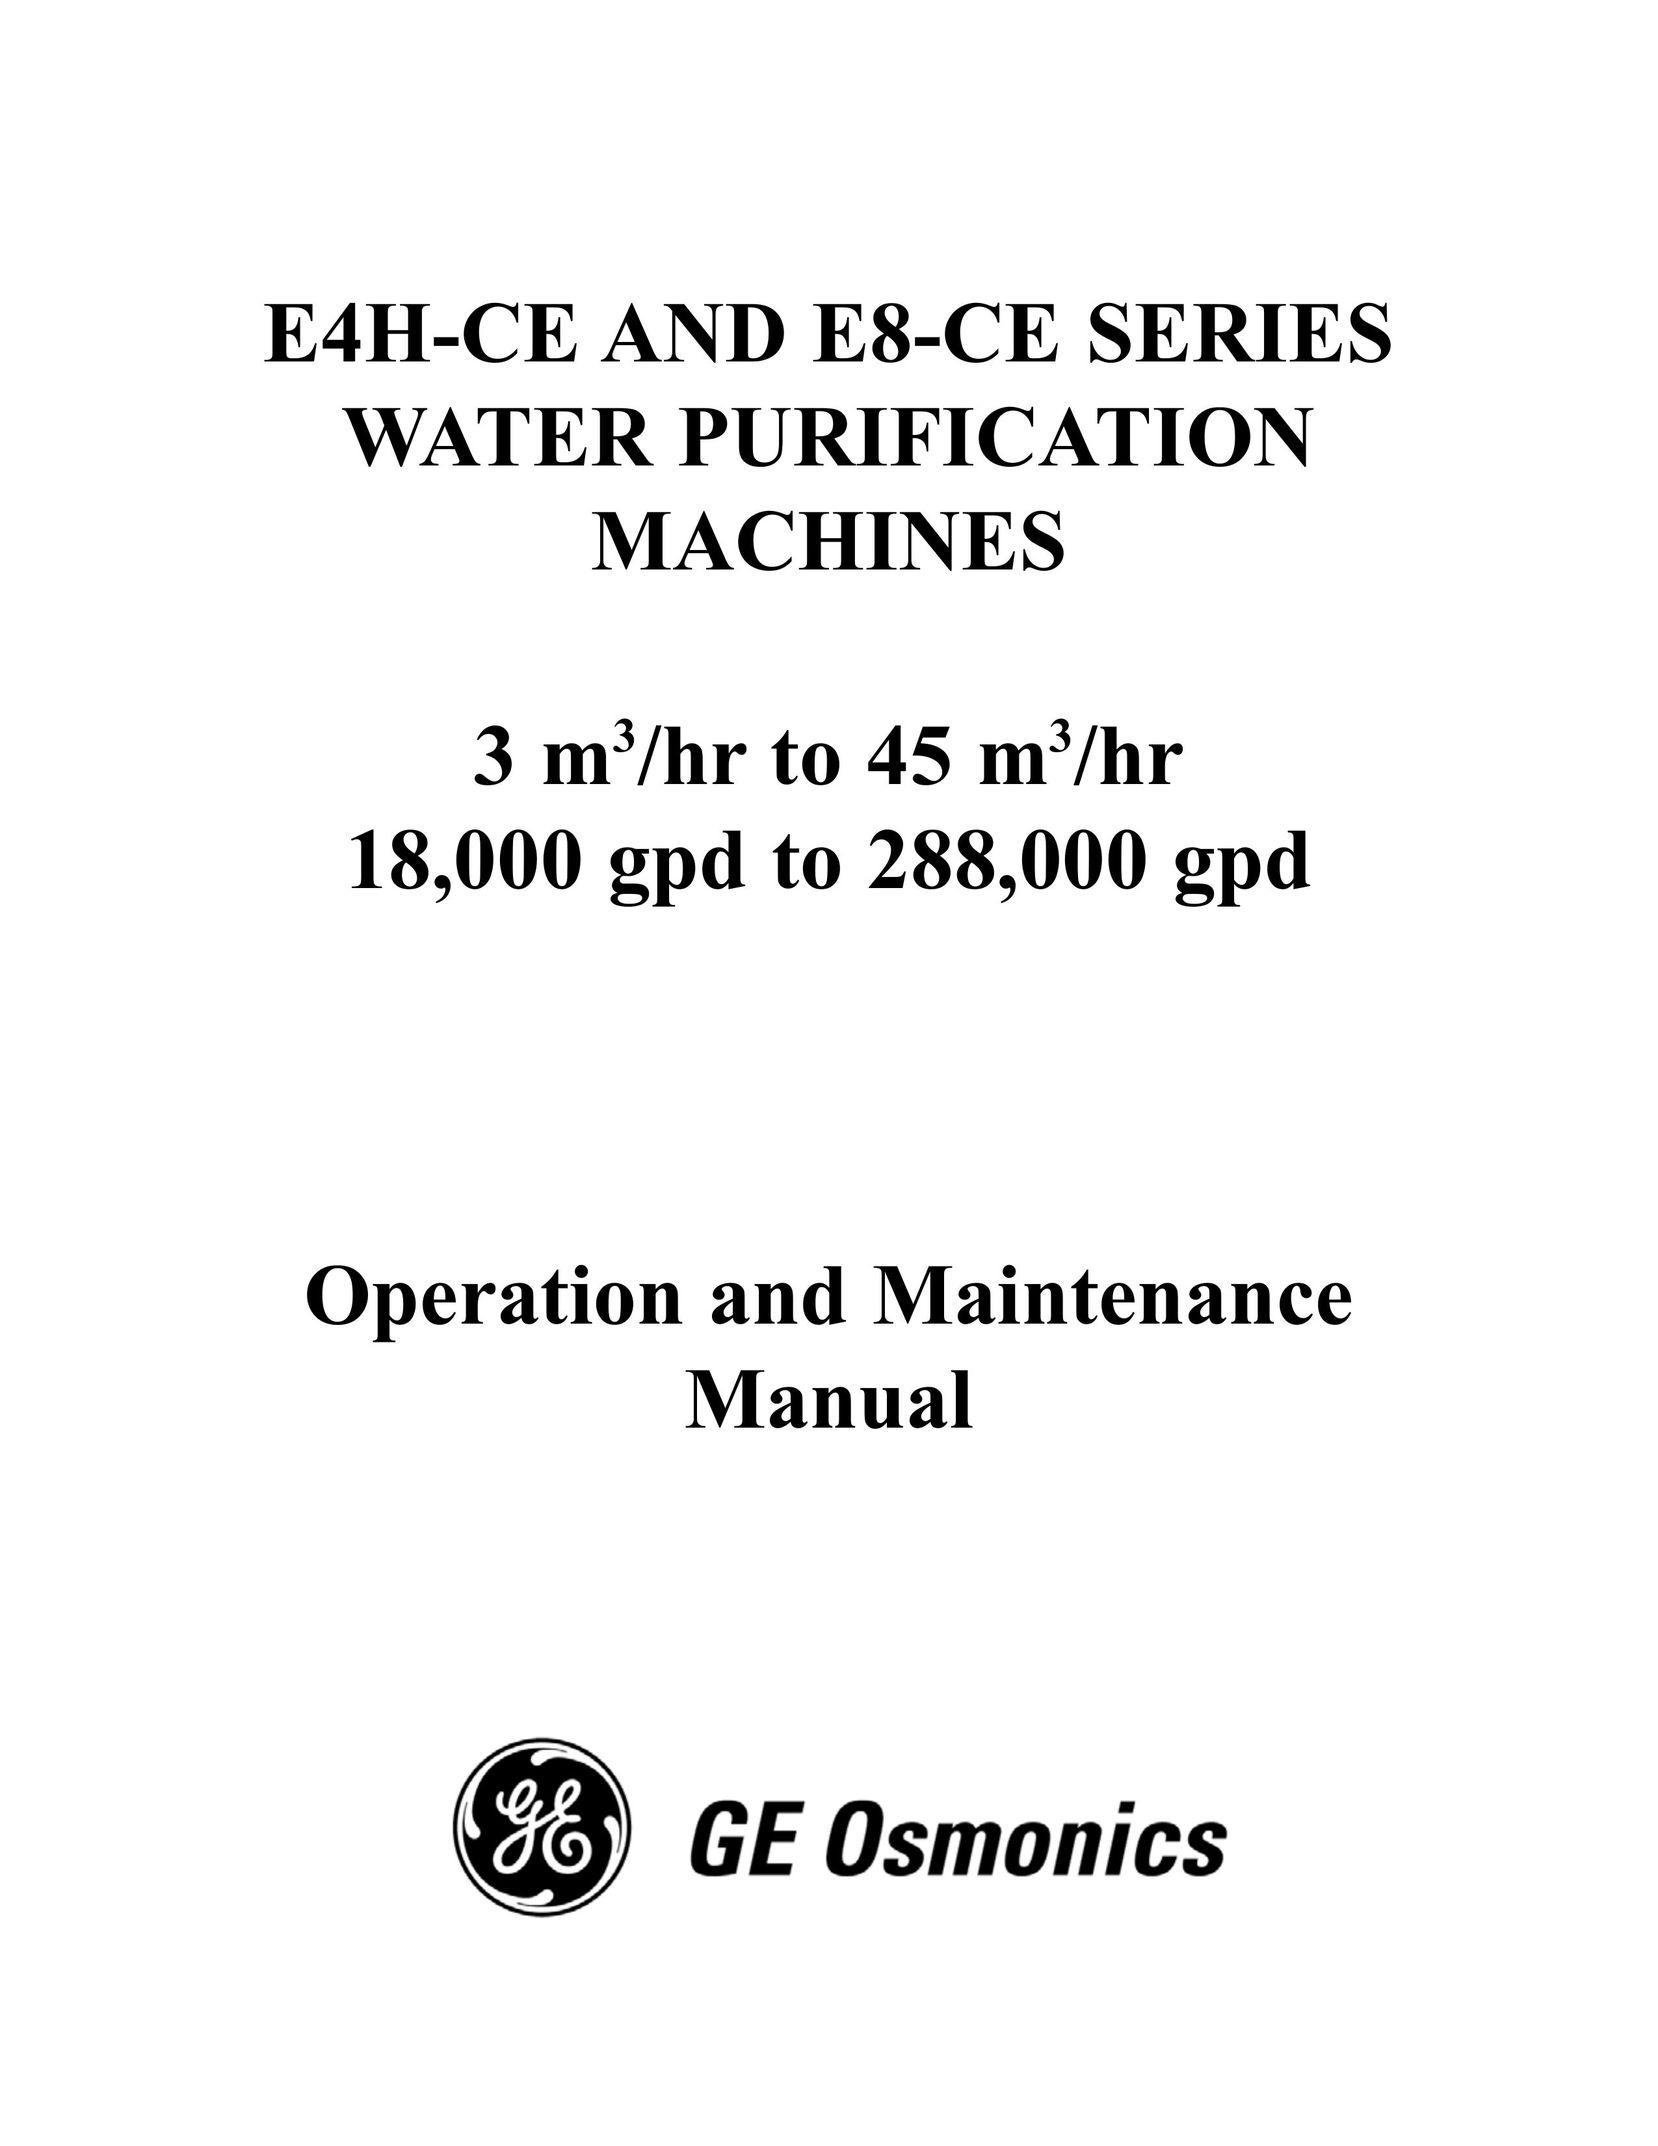 GE E4H-CE Series, E8-CE Series Water System User Manual